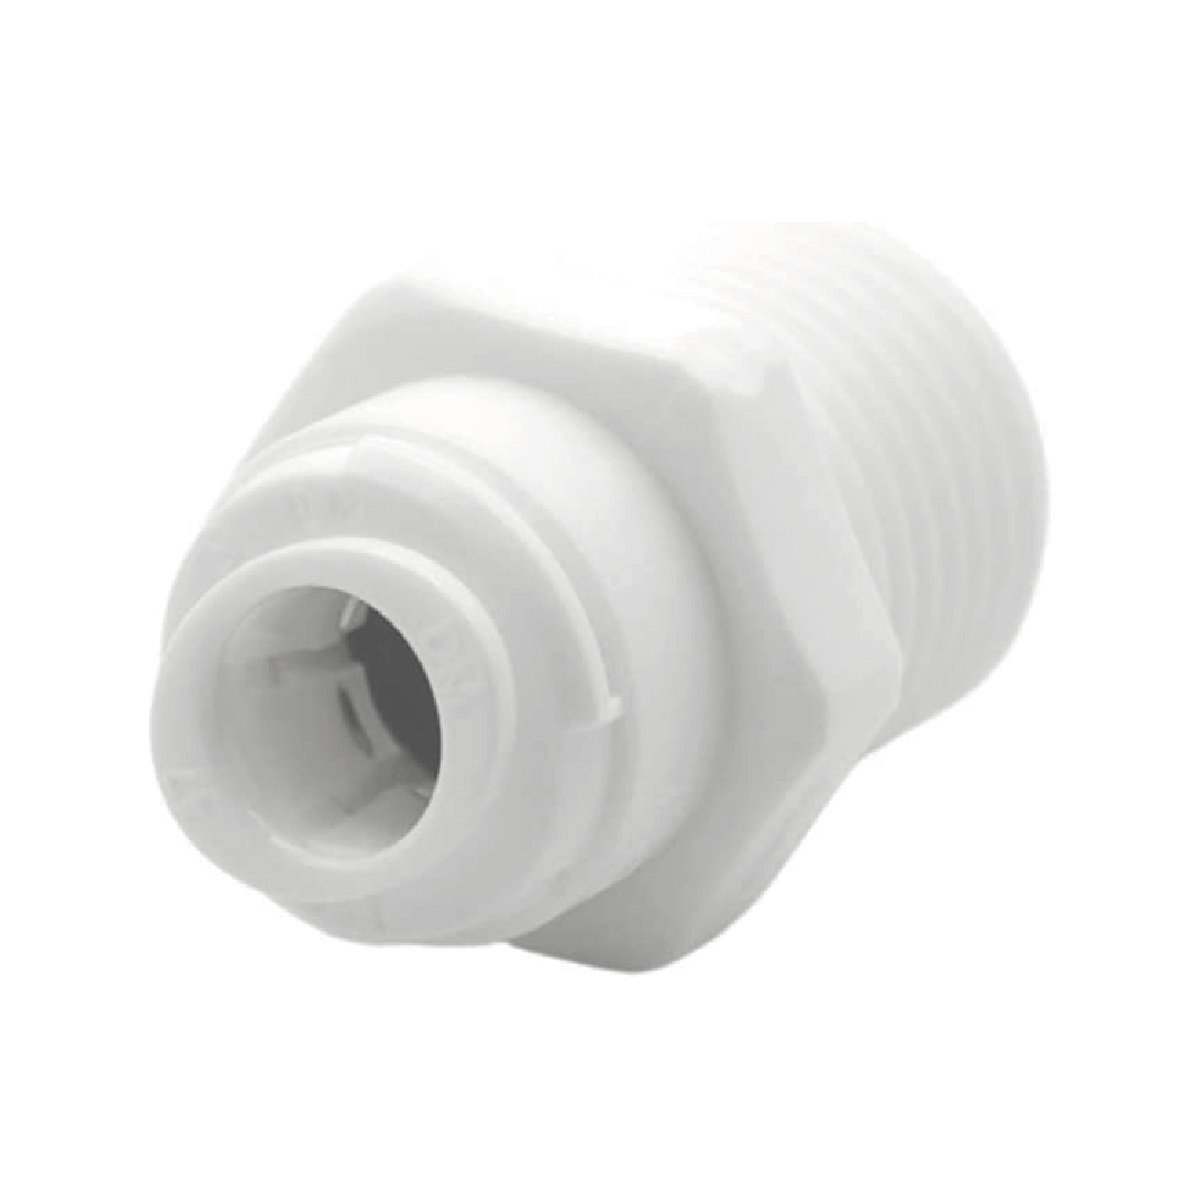 DMfit AMC Acetal Fitting Straight Adaptor Male Connector Push-to-Connect 1/4" , 3/8",1/2" Tube OD-NPTF Thread (10 Pack)